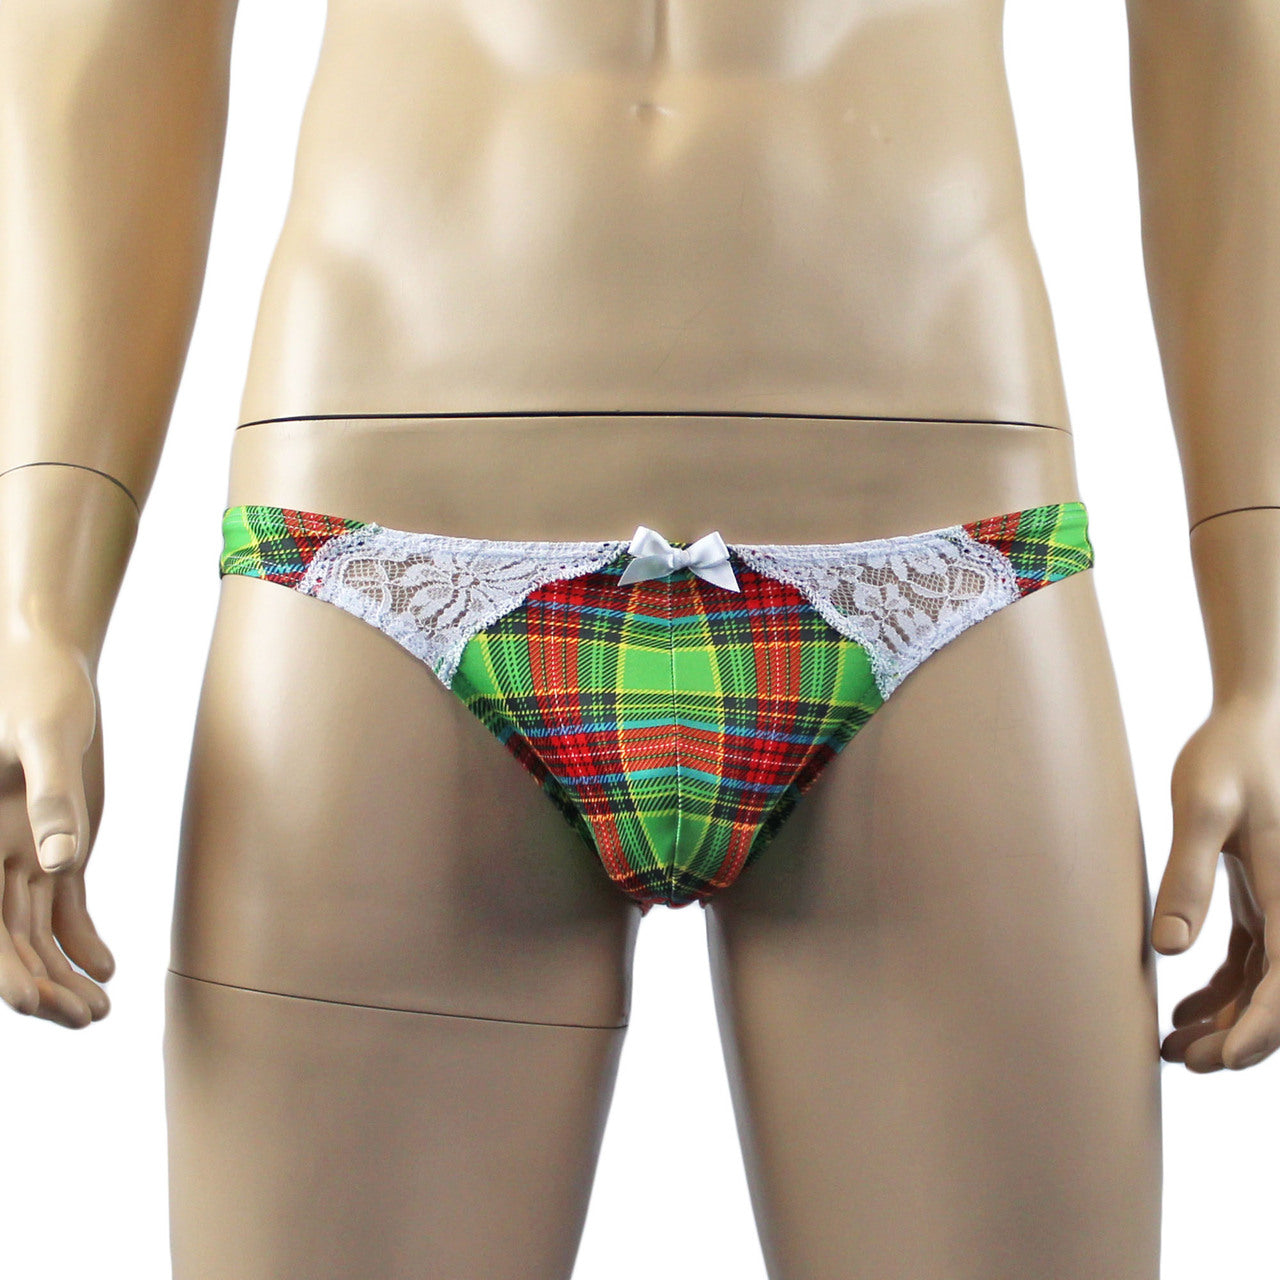 Mens Plaid Tartan Low Rise Bikini Briefs with Lace Trim Green and Red